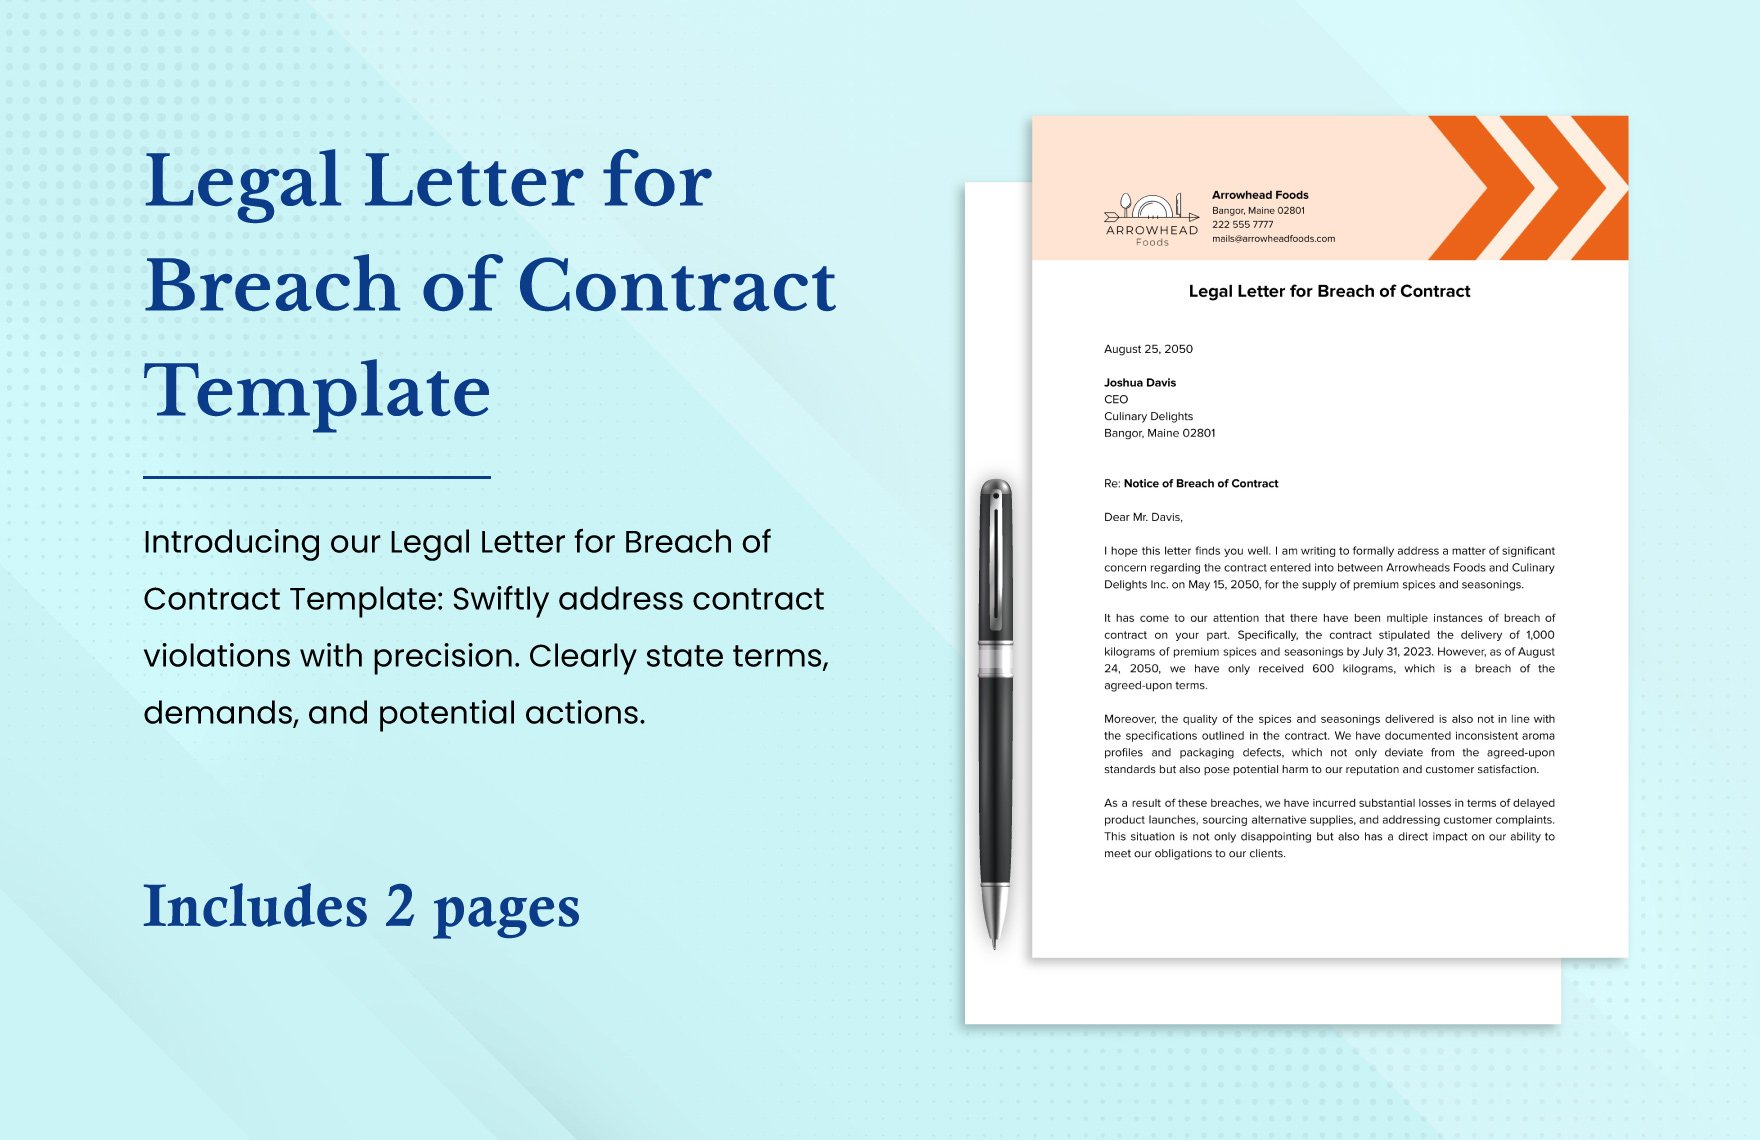 Legal Letter for Breach of Contract Template